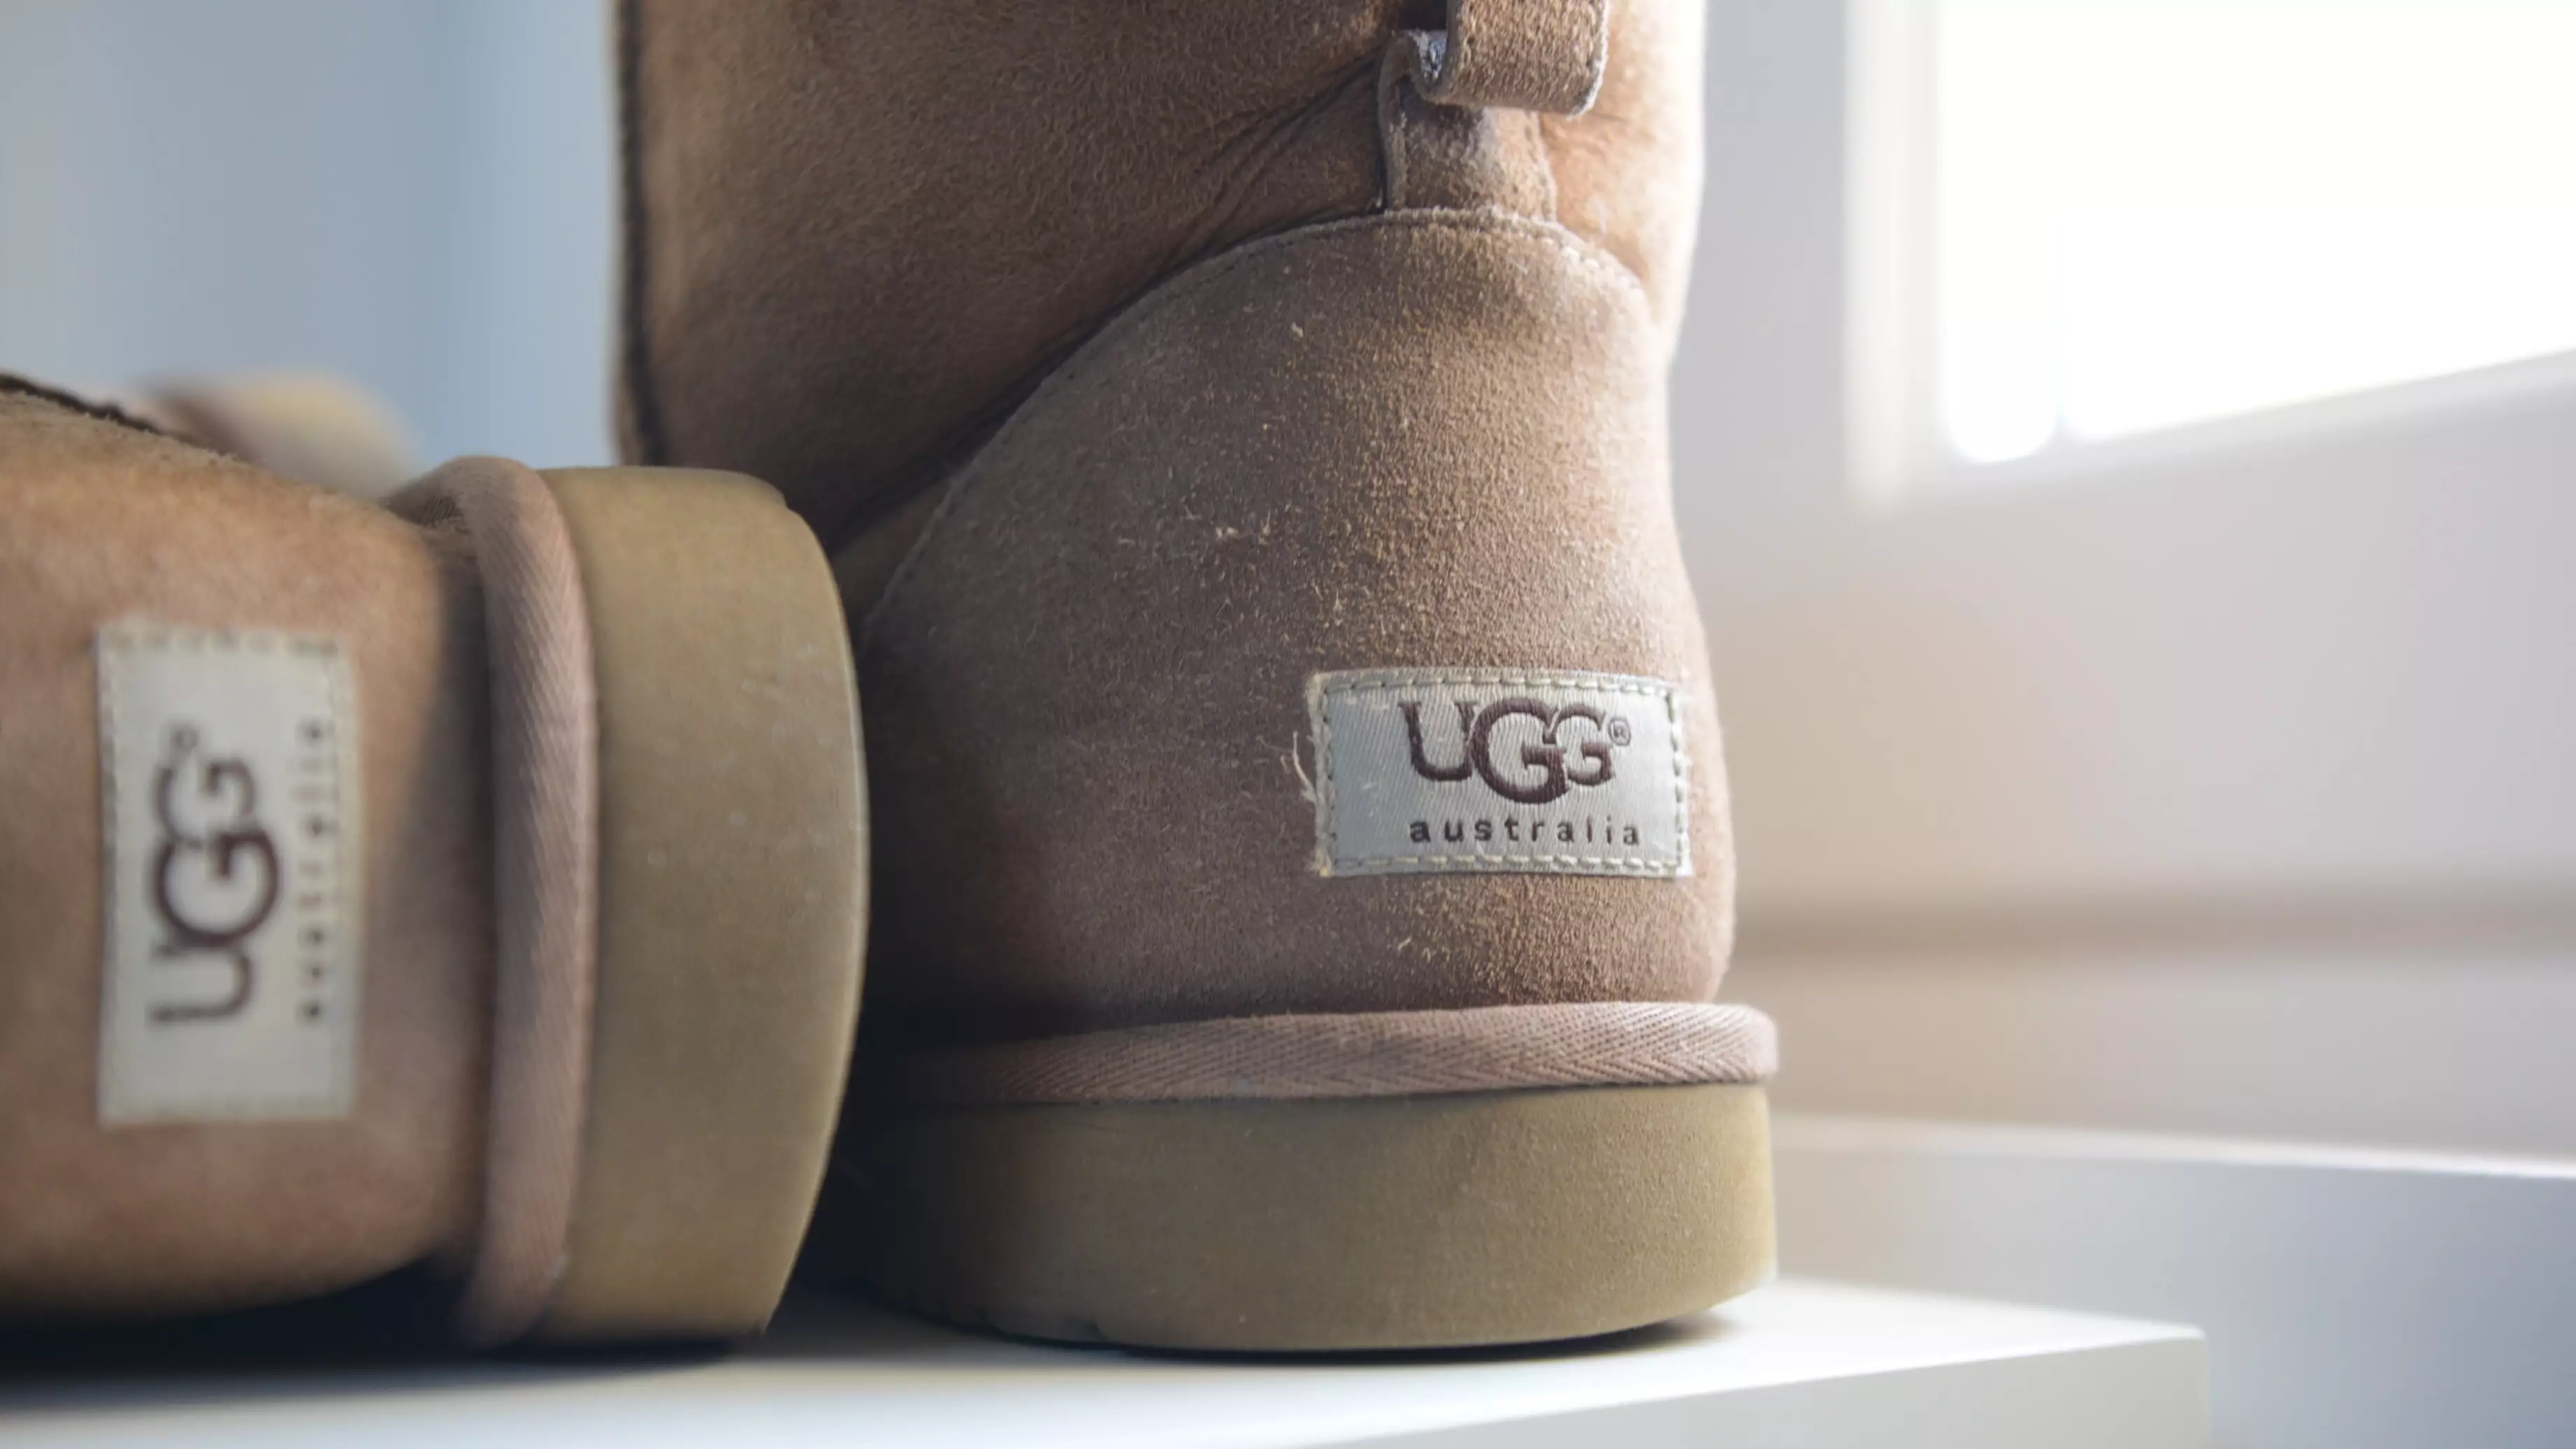 Lockdown Fashion: A Love Letter To My UGG Boots As Sales Go Through The Roof